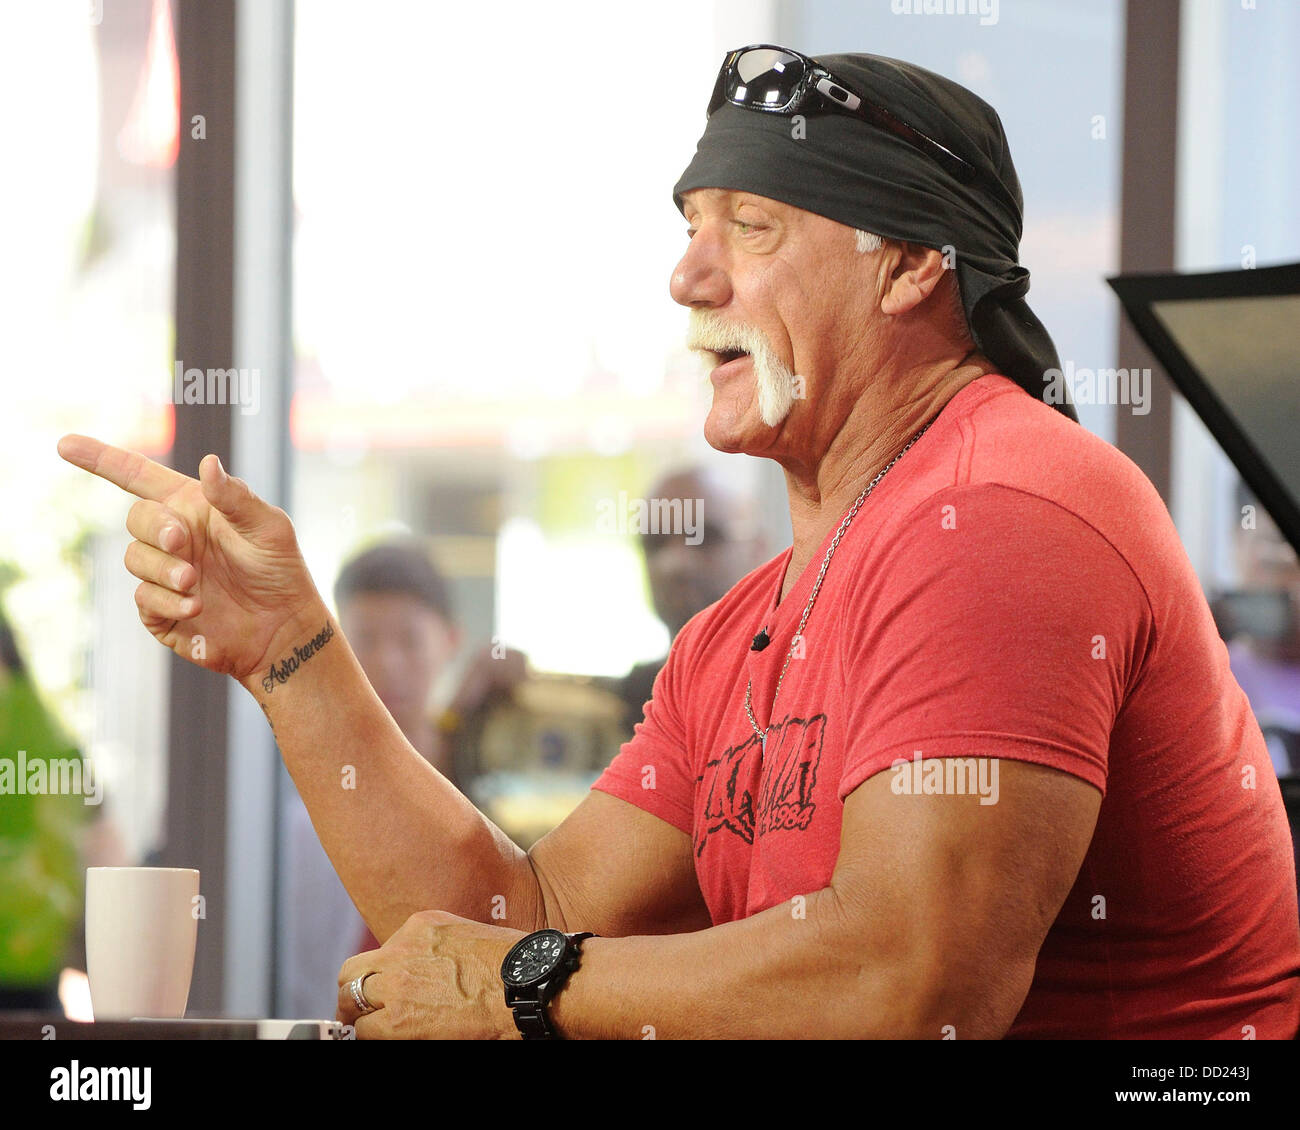 Toronto, Canada. 23 Aug 2013. Professional wrestler Hulk Hogan appears on Global TV's The Morning Show in Toronto. Credit:  EXImages/Alamy Live News Stock Photo